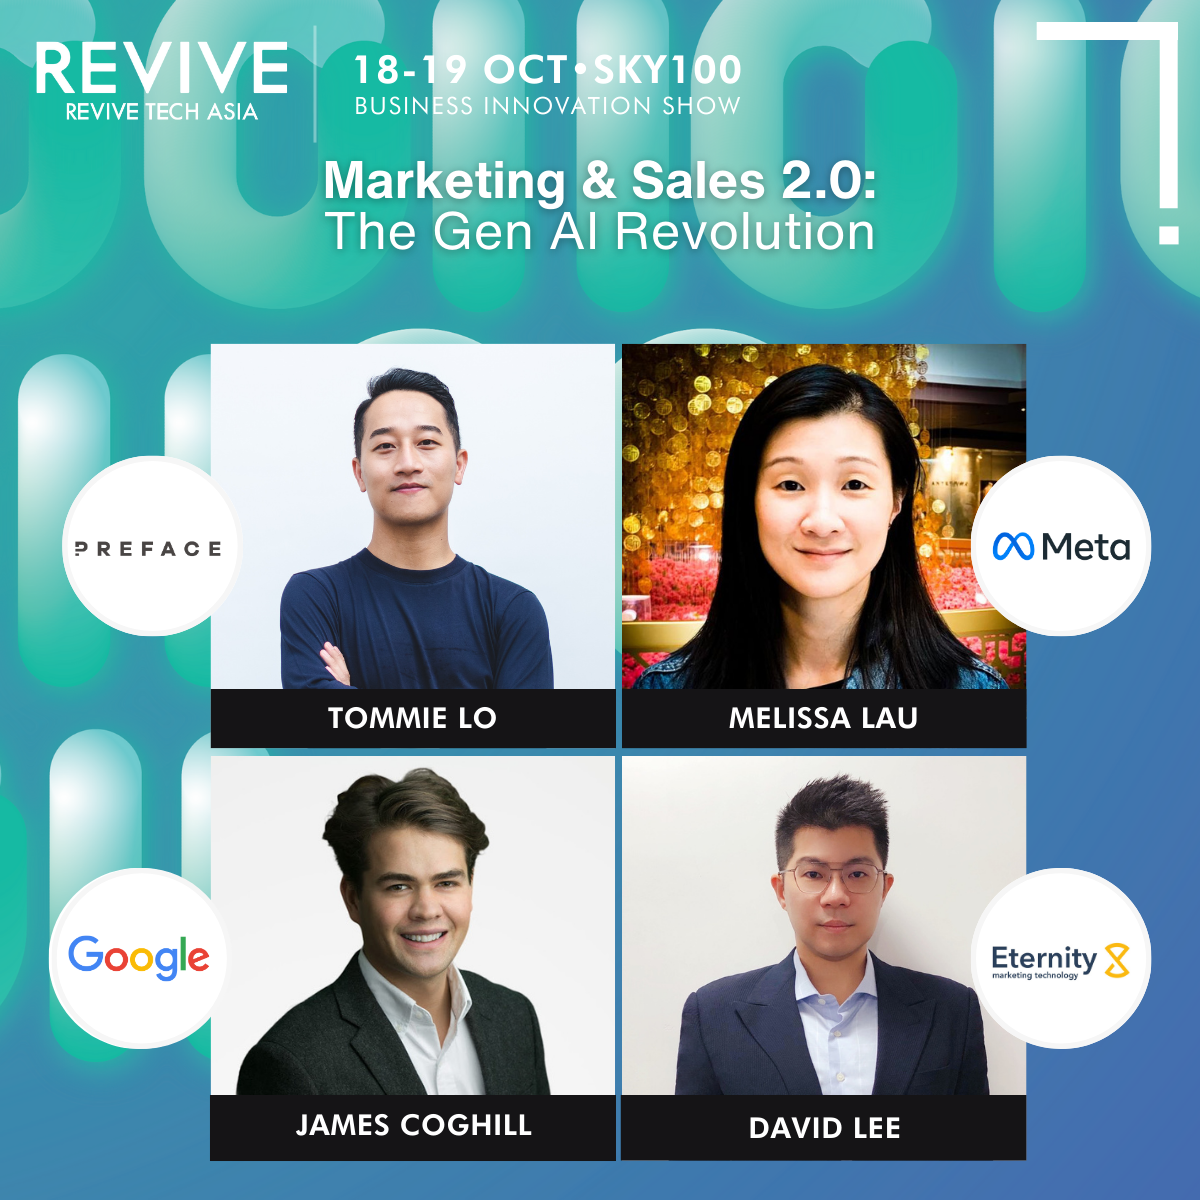 Revive Tech Asia 2023 Marketing & Sales 2.0: The Gen AI RevolutionDavid Lee Chief Financial Officer and Head of Product Innovation EternityX Marketing Technology Limited   Melissa Lau Head of Business Product Marketing, Greater China Region Meta   James Coghill Industry Leader, Travel Google   Tommie Lo Chief Executive Officer Preface